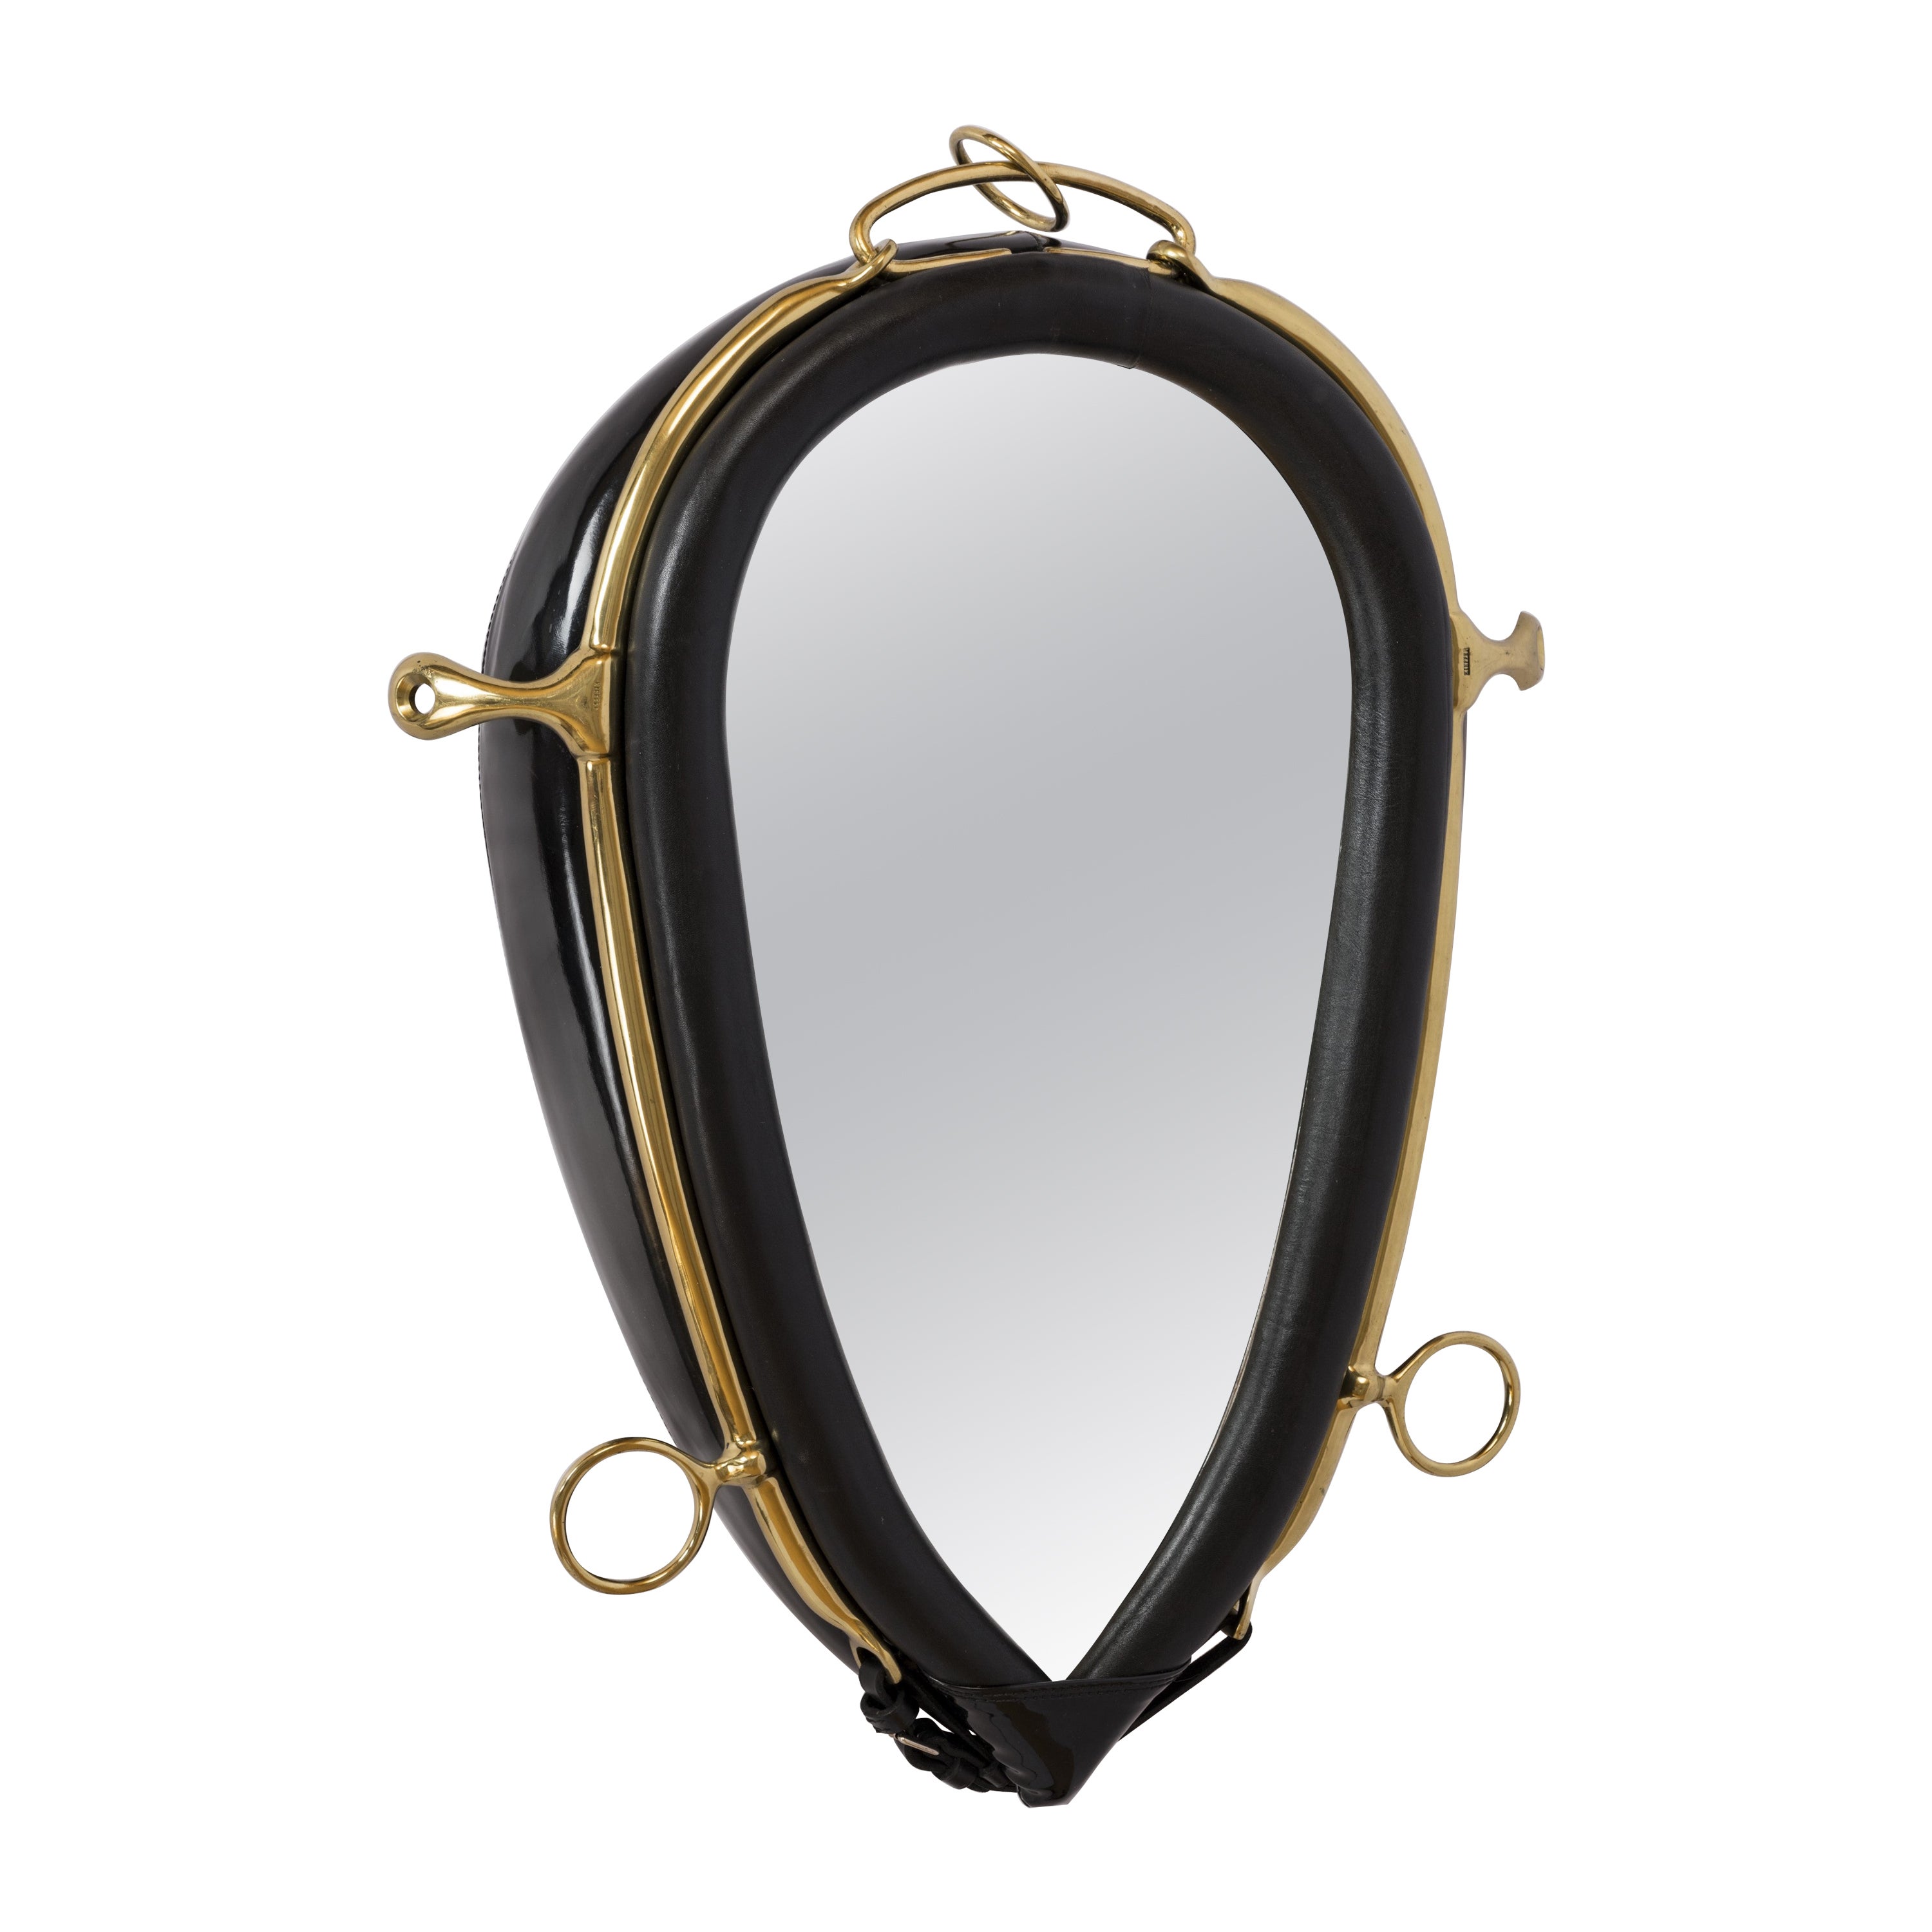 Padded Black Faux Leather & Brass Equestrian Mirror by Kieffer - France 1970's For Sale